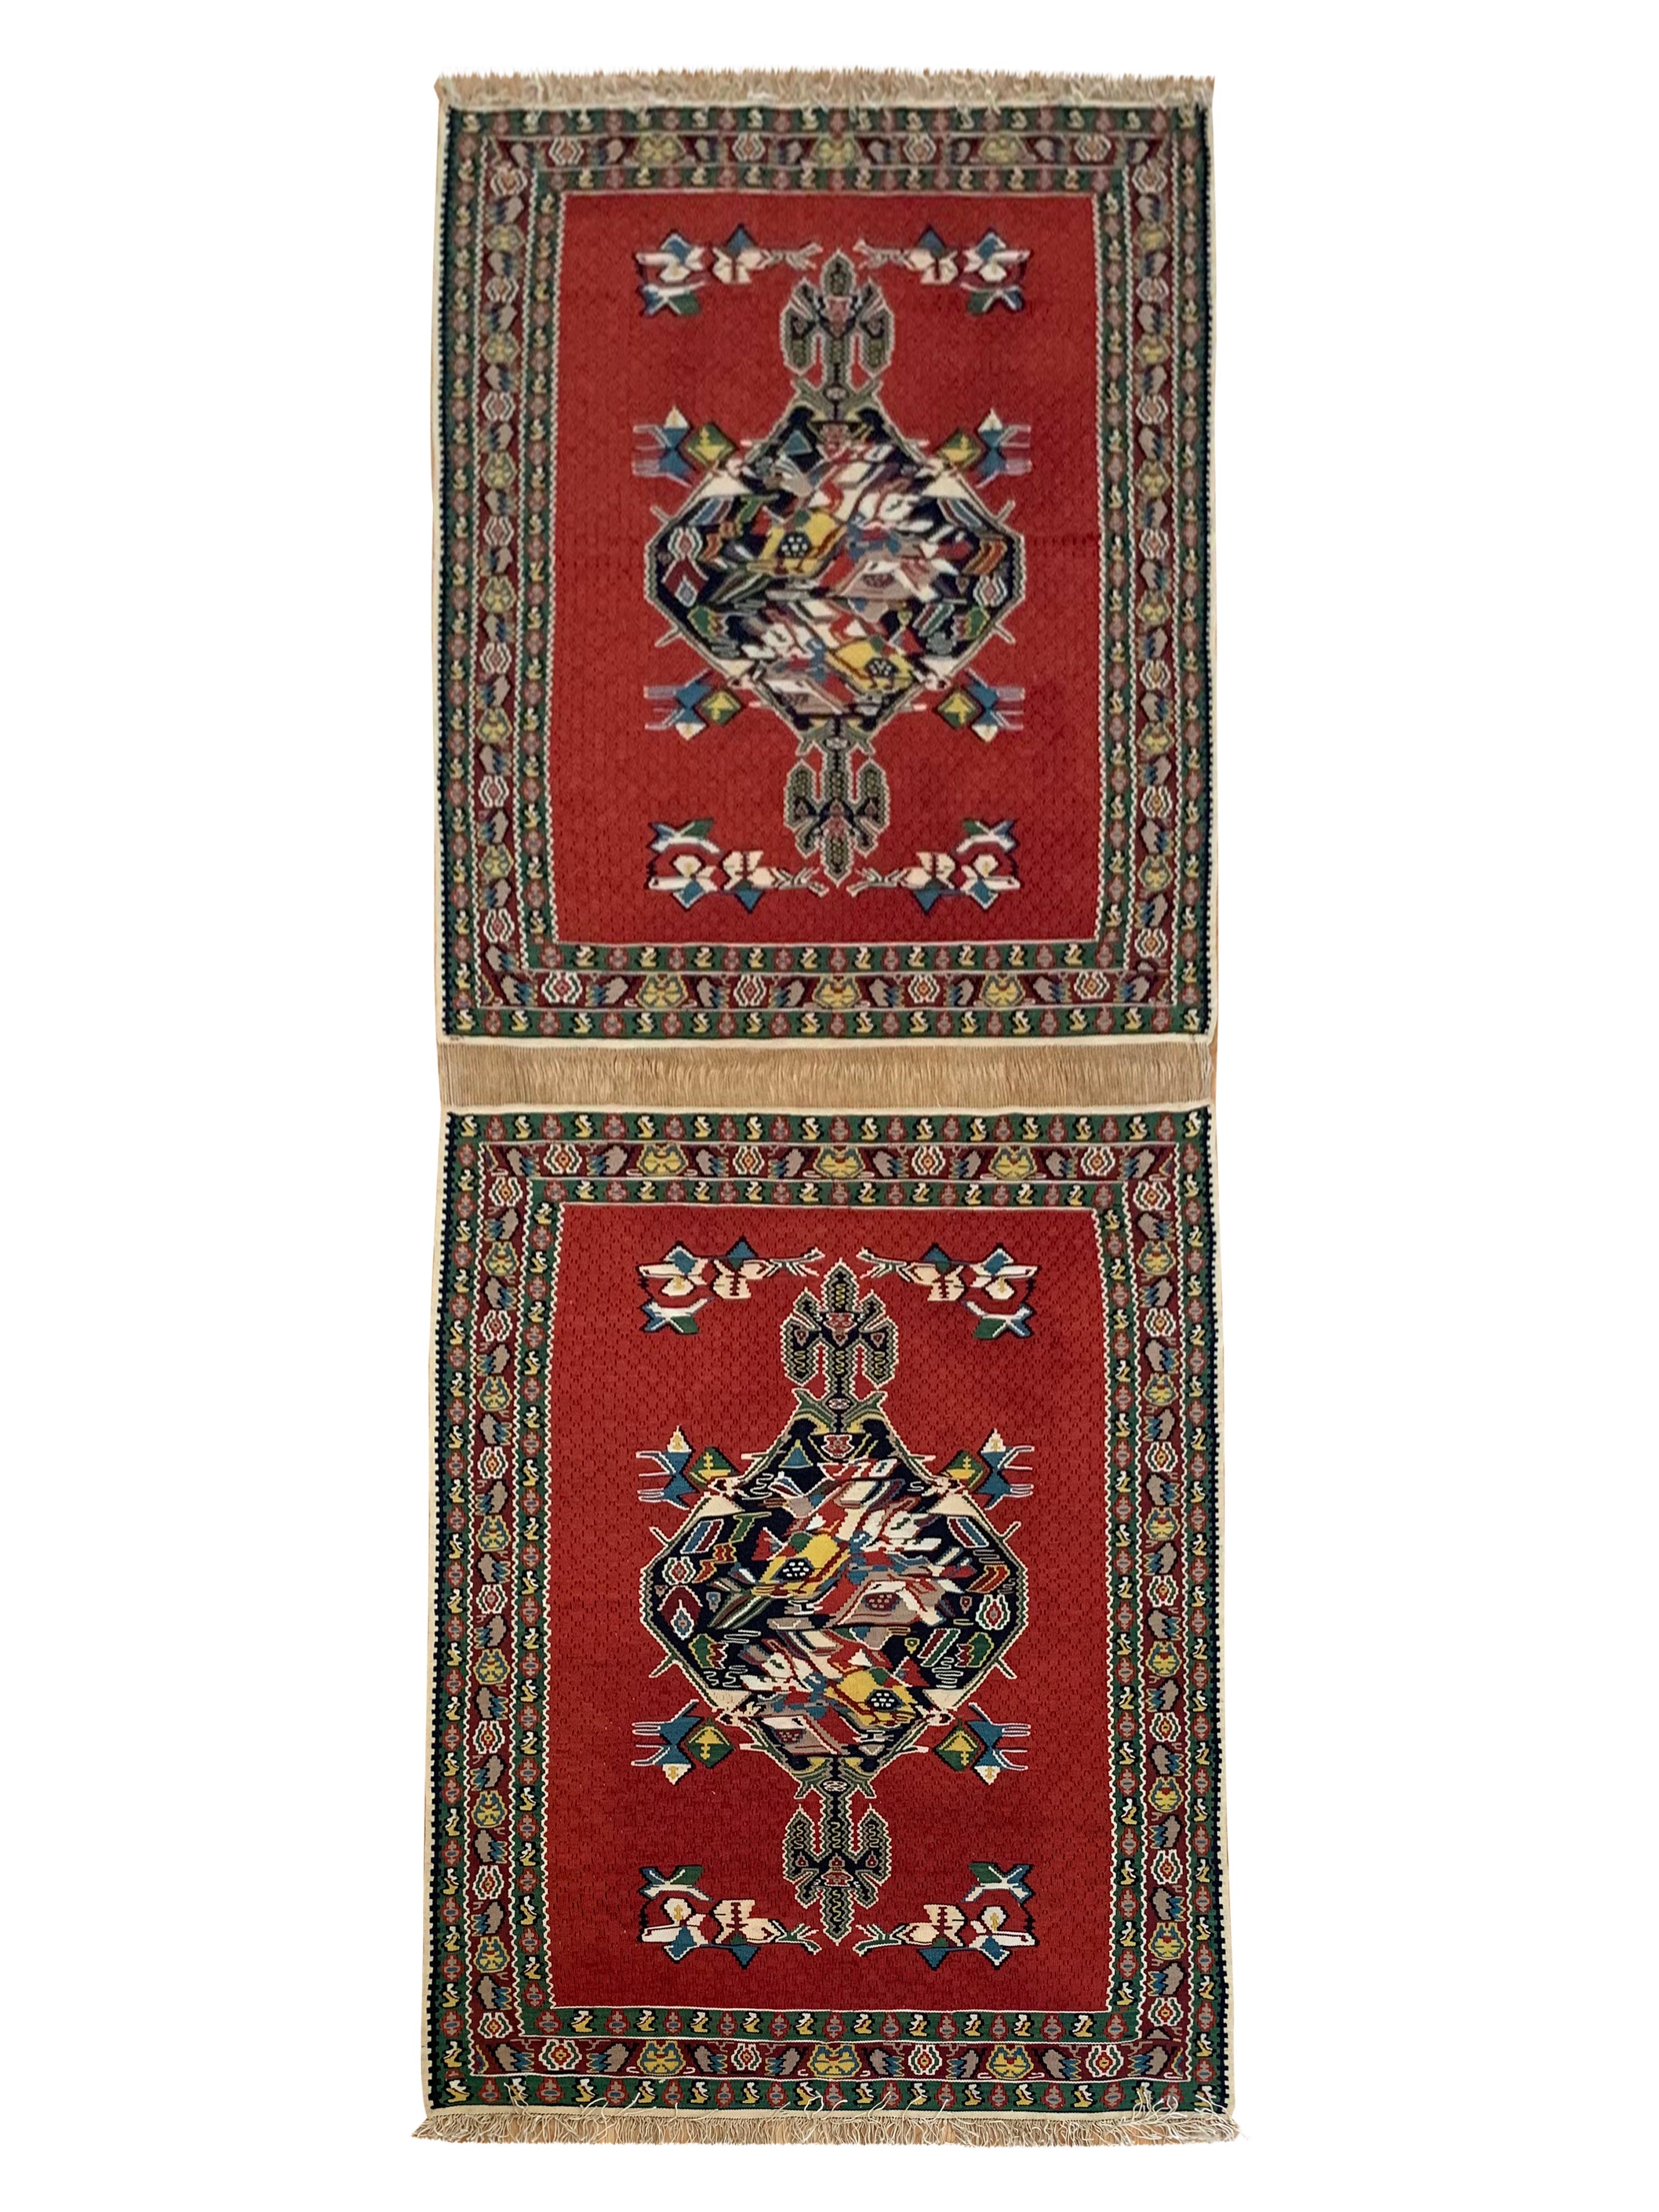 Pair of Red Silk and Wool Kilim Rugs Handmade Geometric Area Rugs For Sale 8